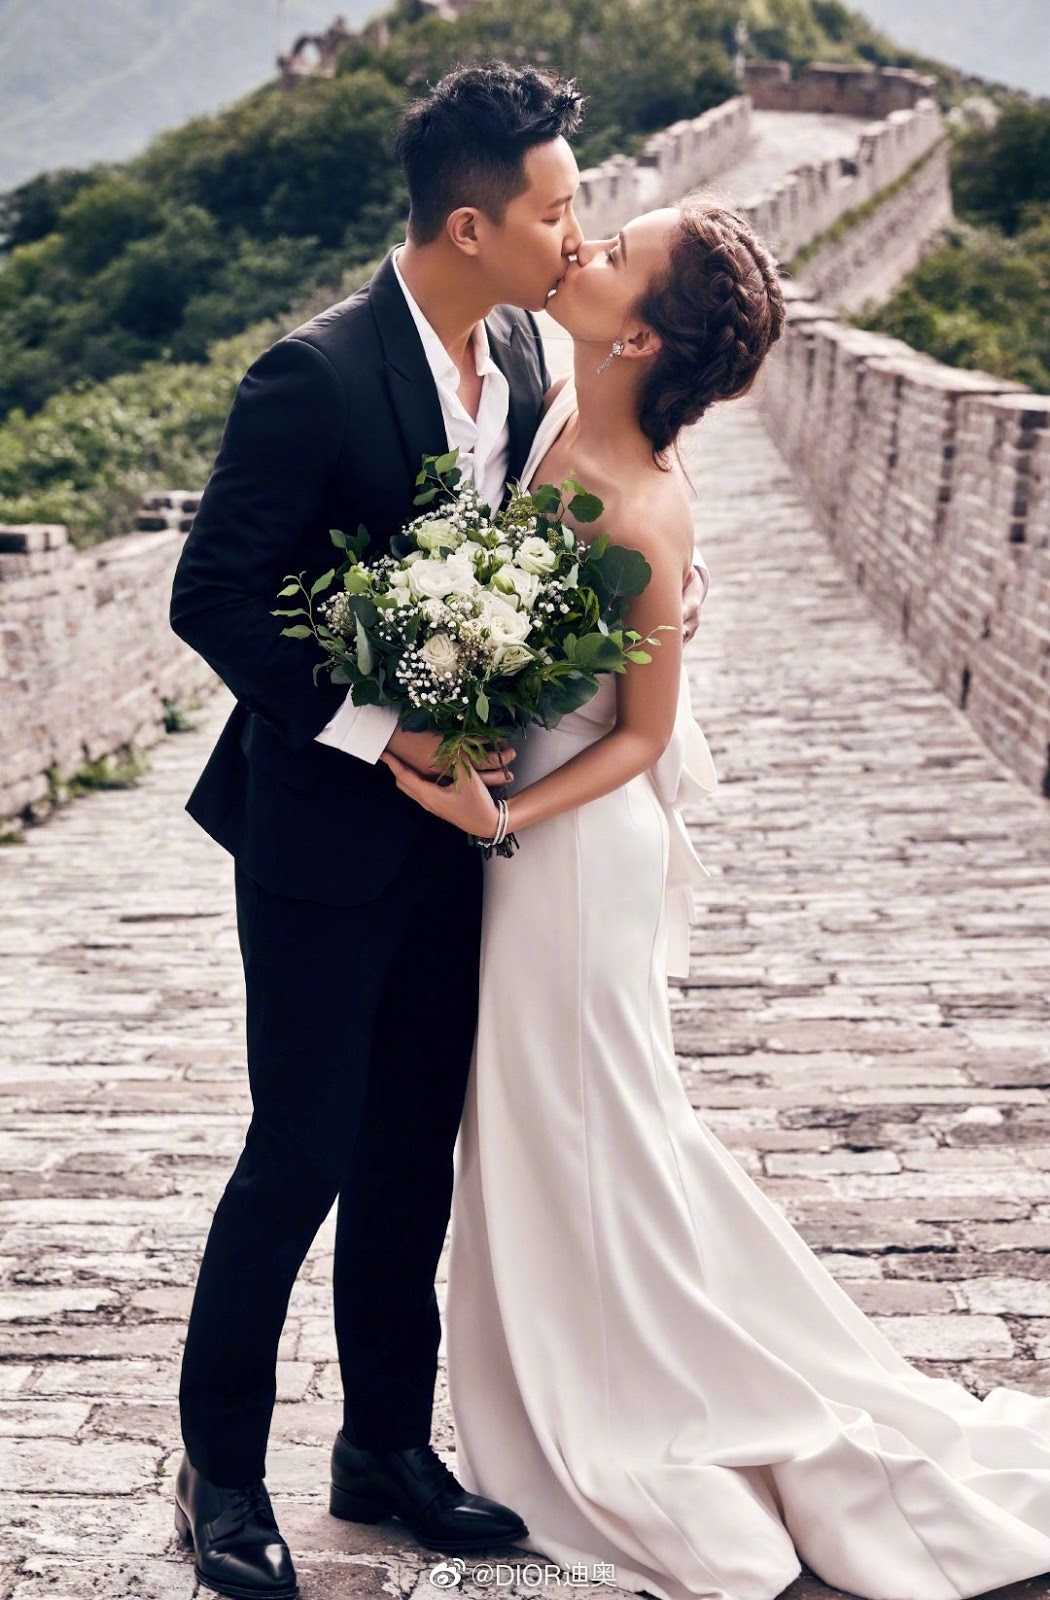 Married in New Zealand, Han Geng and Celina Jade Welcome 2020